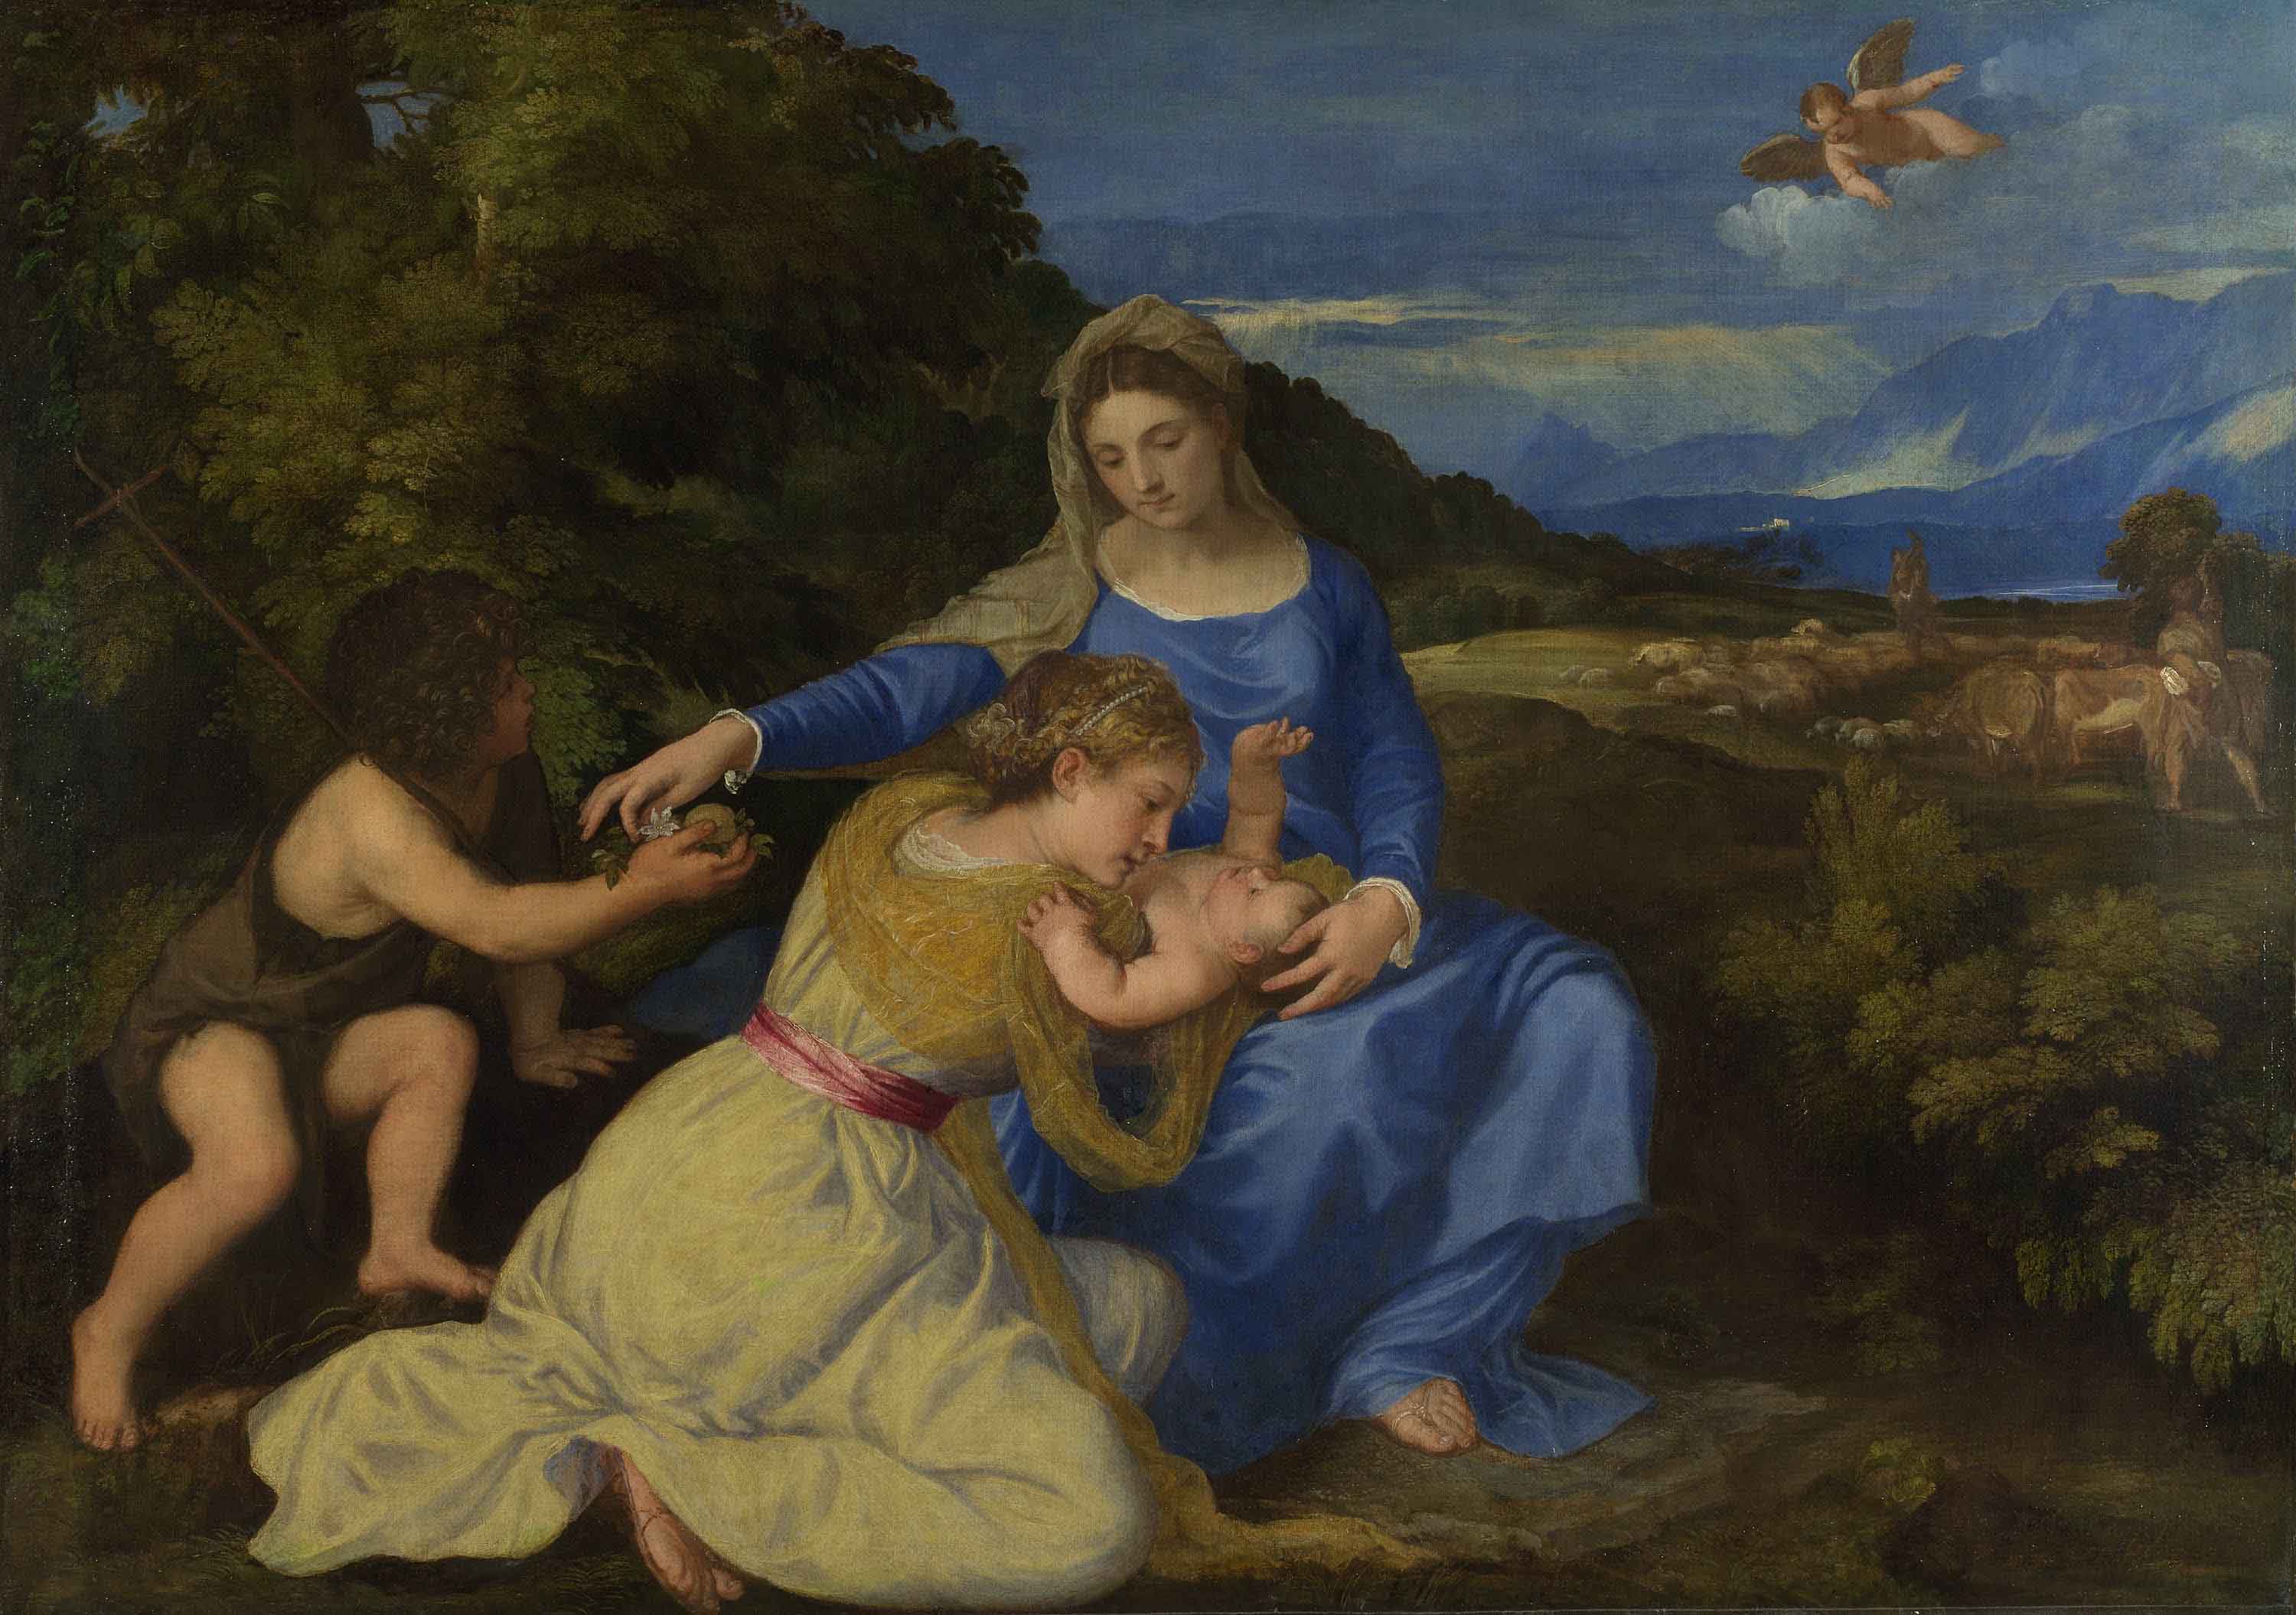 Titian The Virgin and Child with the Infant Saint John and a Female Saint or Donor